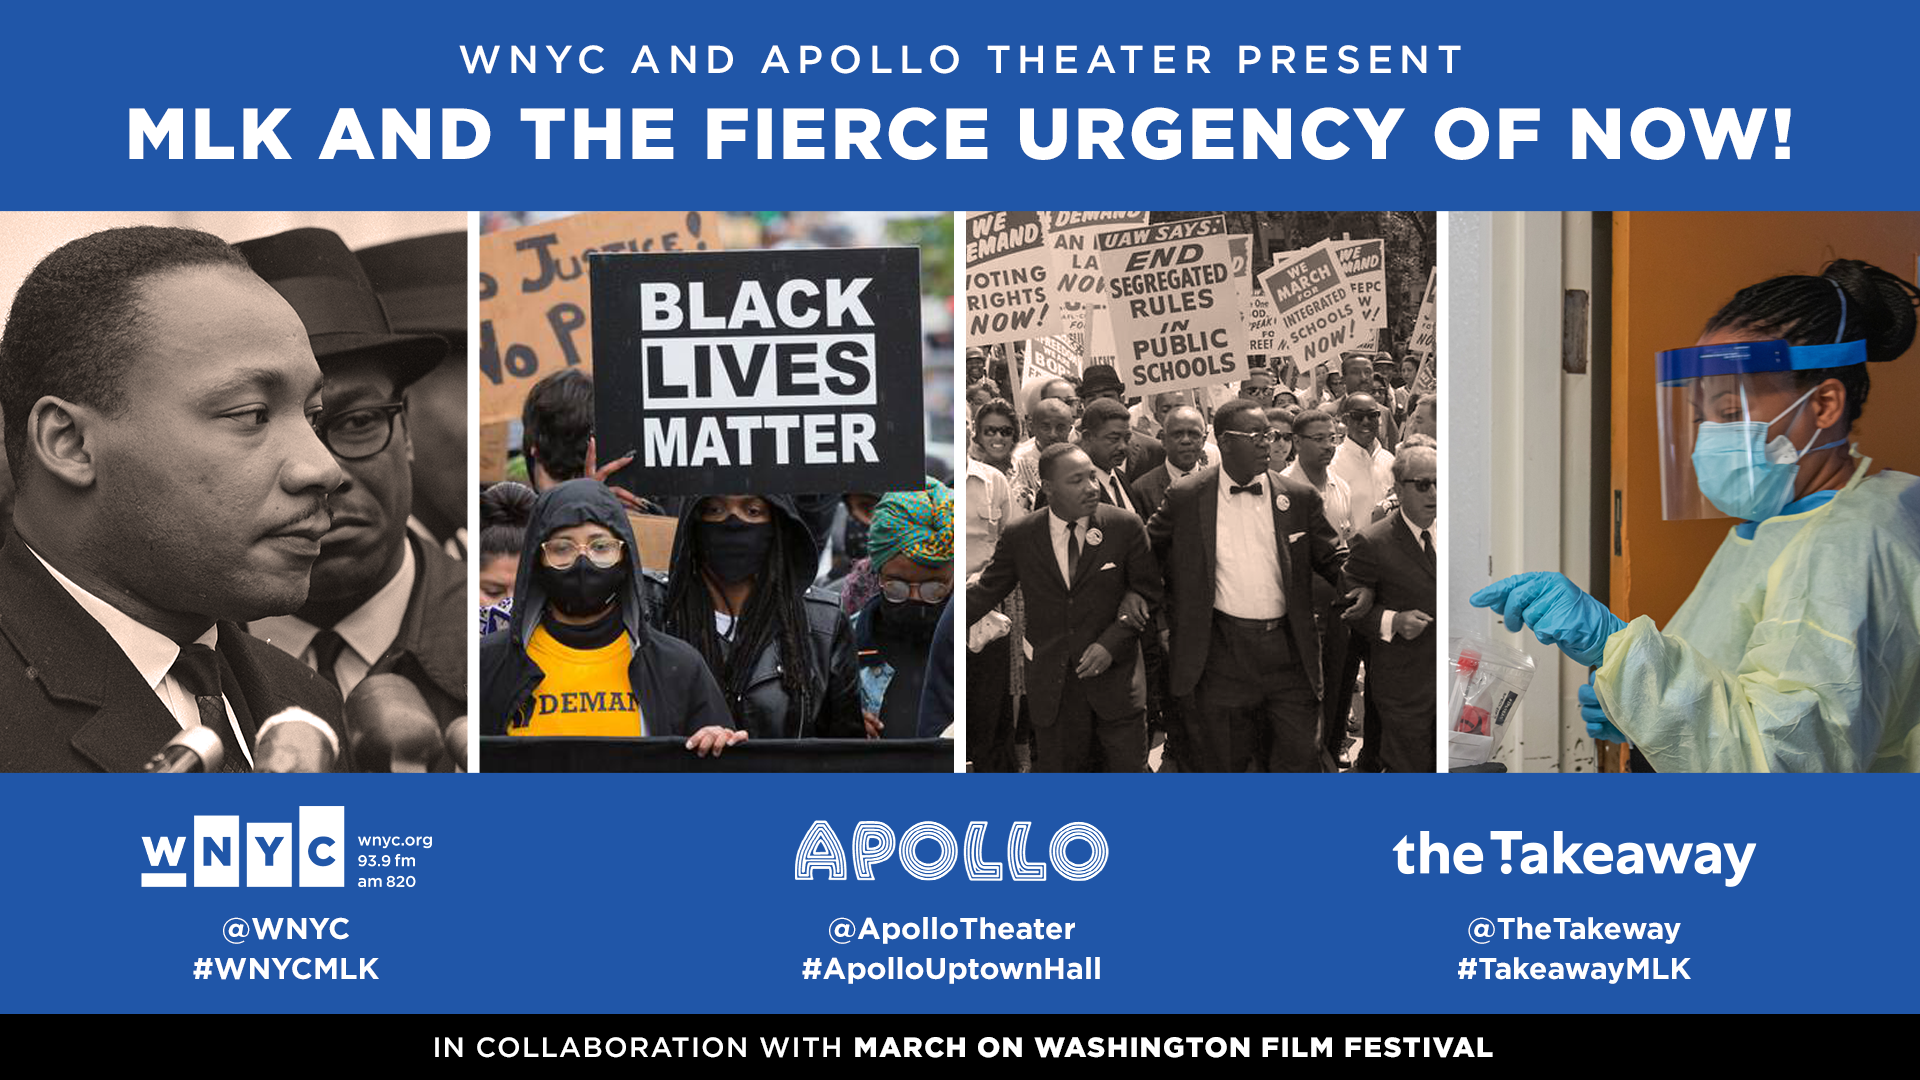 WNYC and Apollo Theater Present: MLK and the Fierce Urgency of Now!